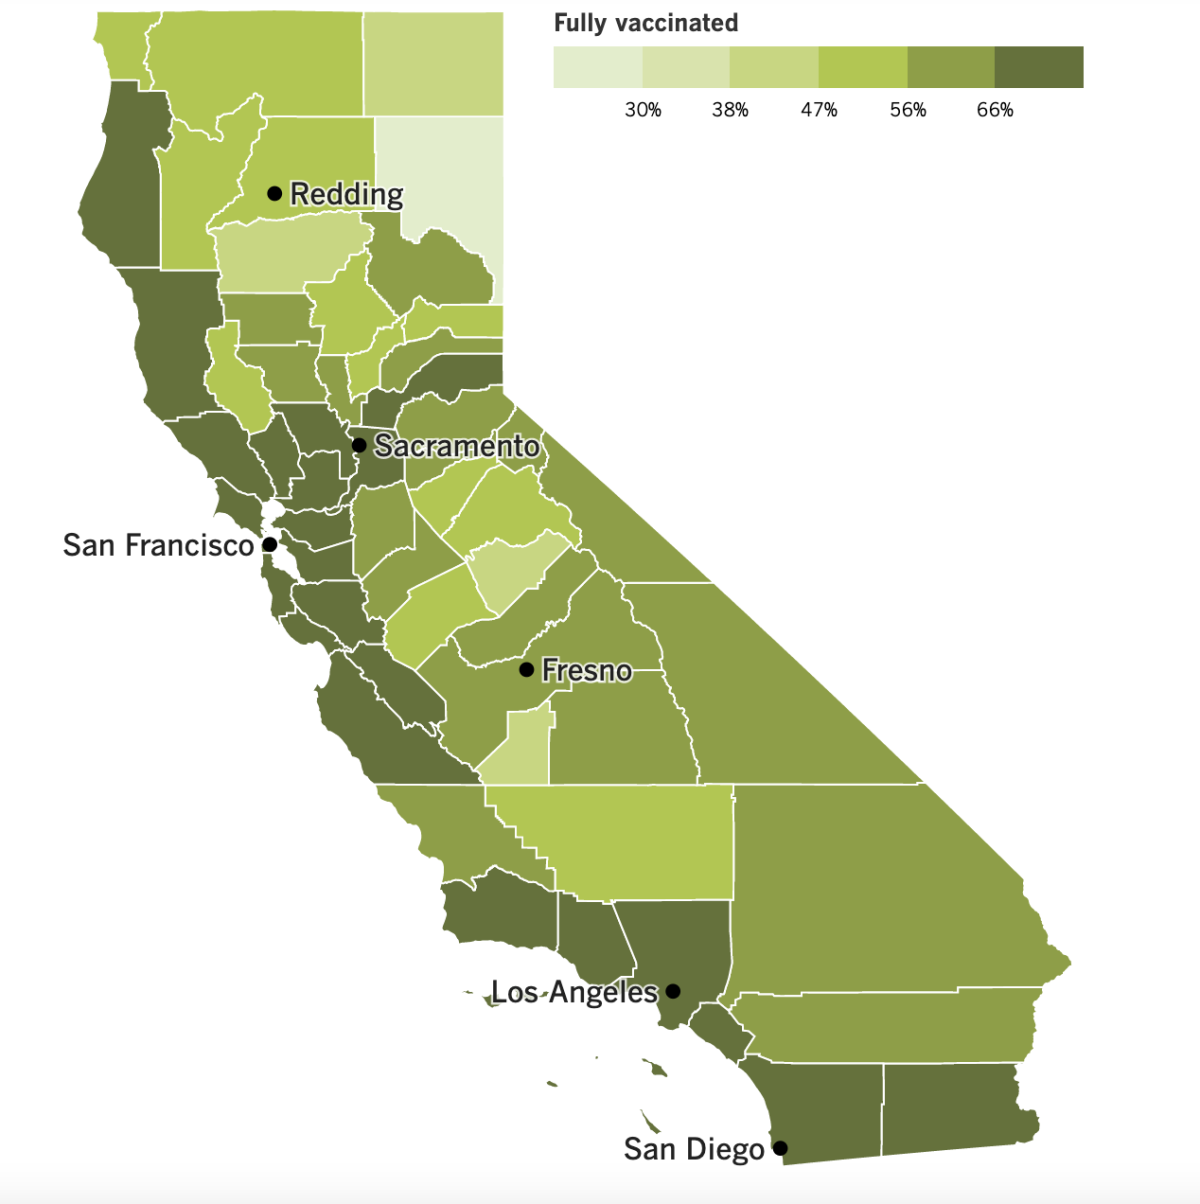 A map showing California's COVID-19 vaccination progress by county as of Aug. 16, 2022.